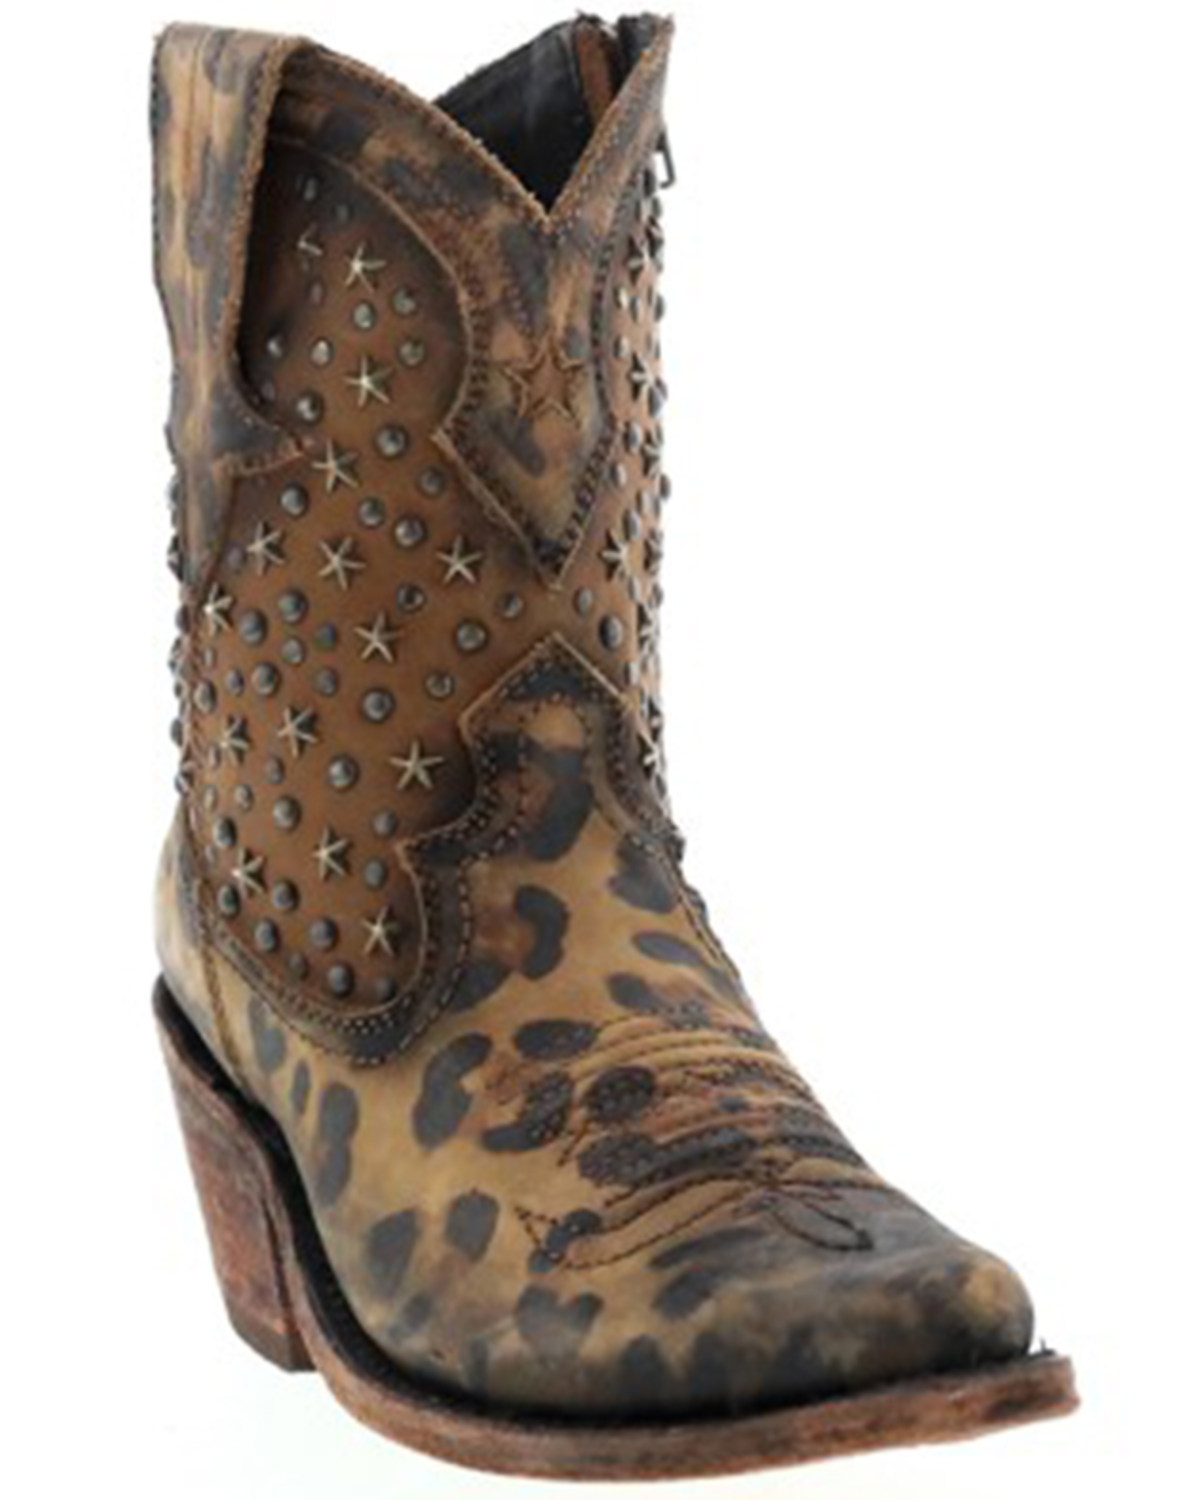 Caborca Silver by Liberty Black Women's Leopard Print Studded Short Western Boots - Pointed Toe